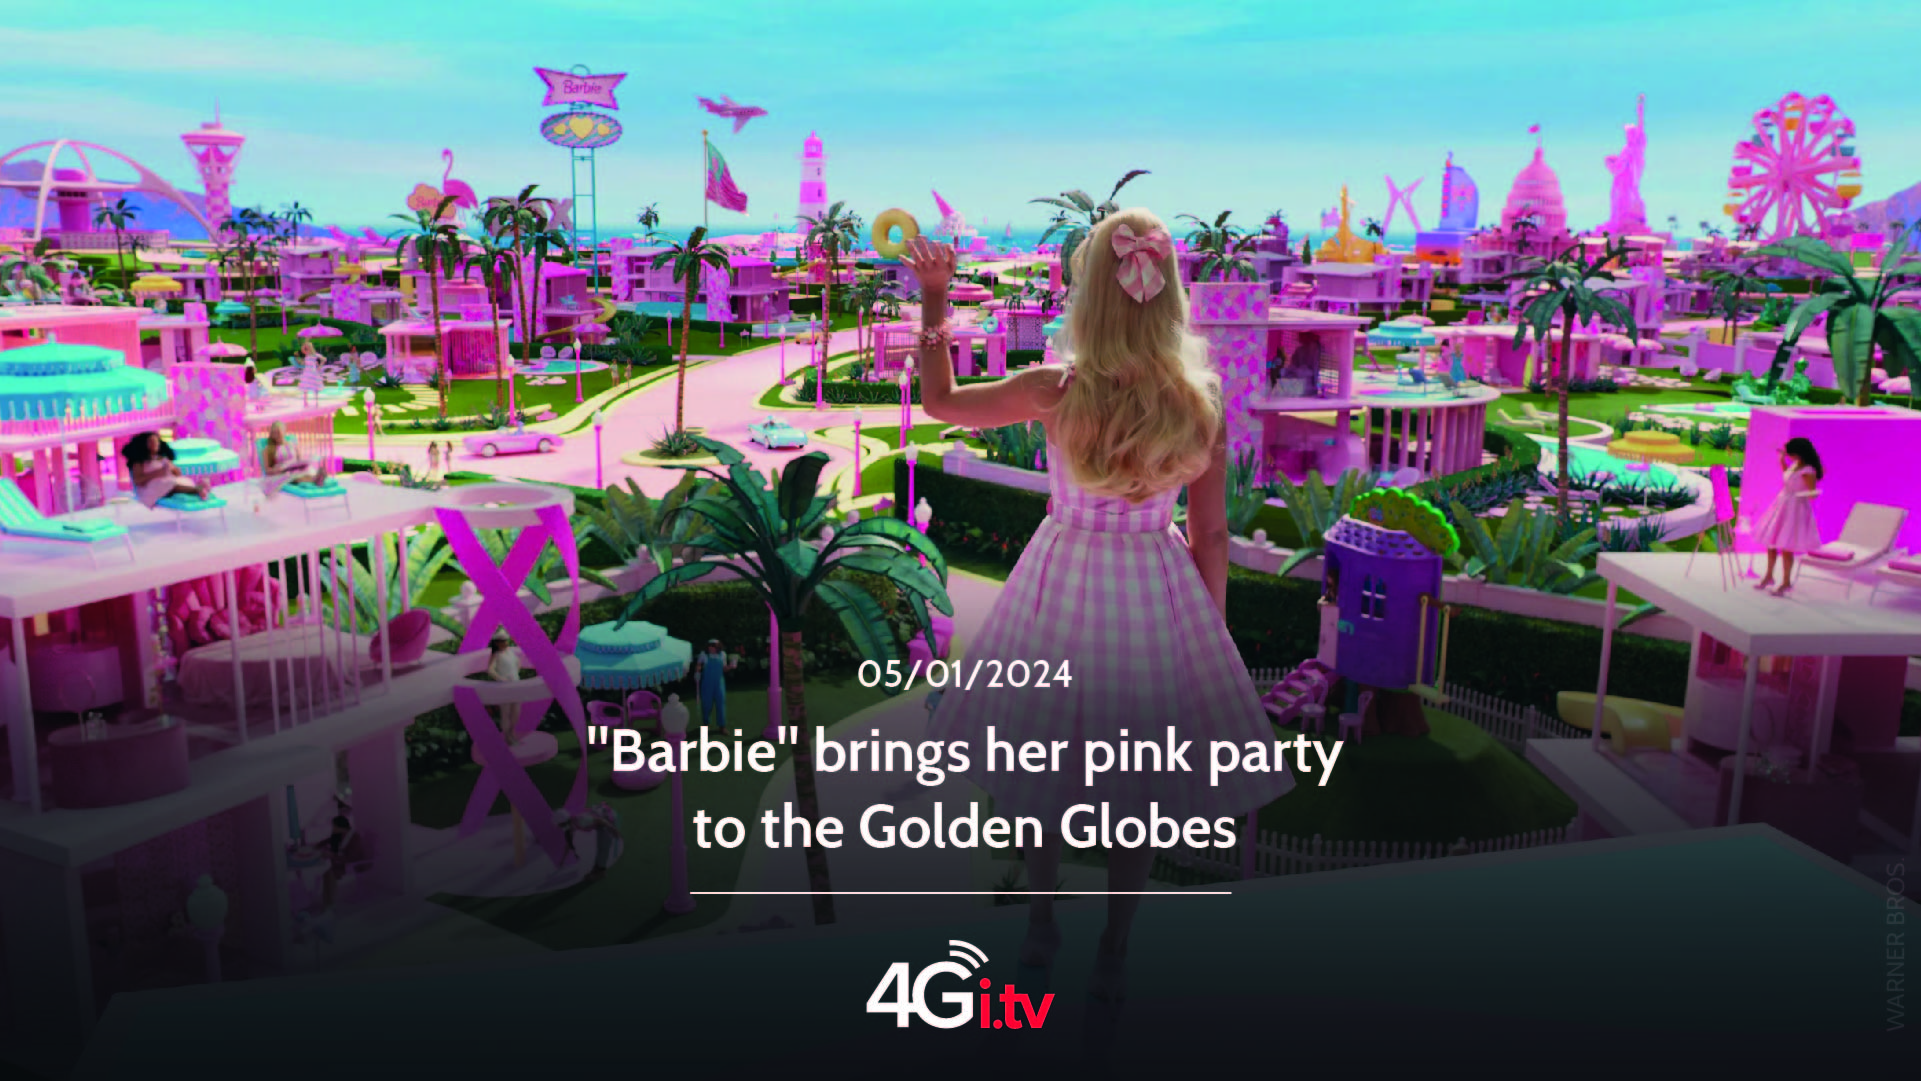 Подробнее о статье “Barbie” brings her pink party to the Golden Globes